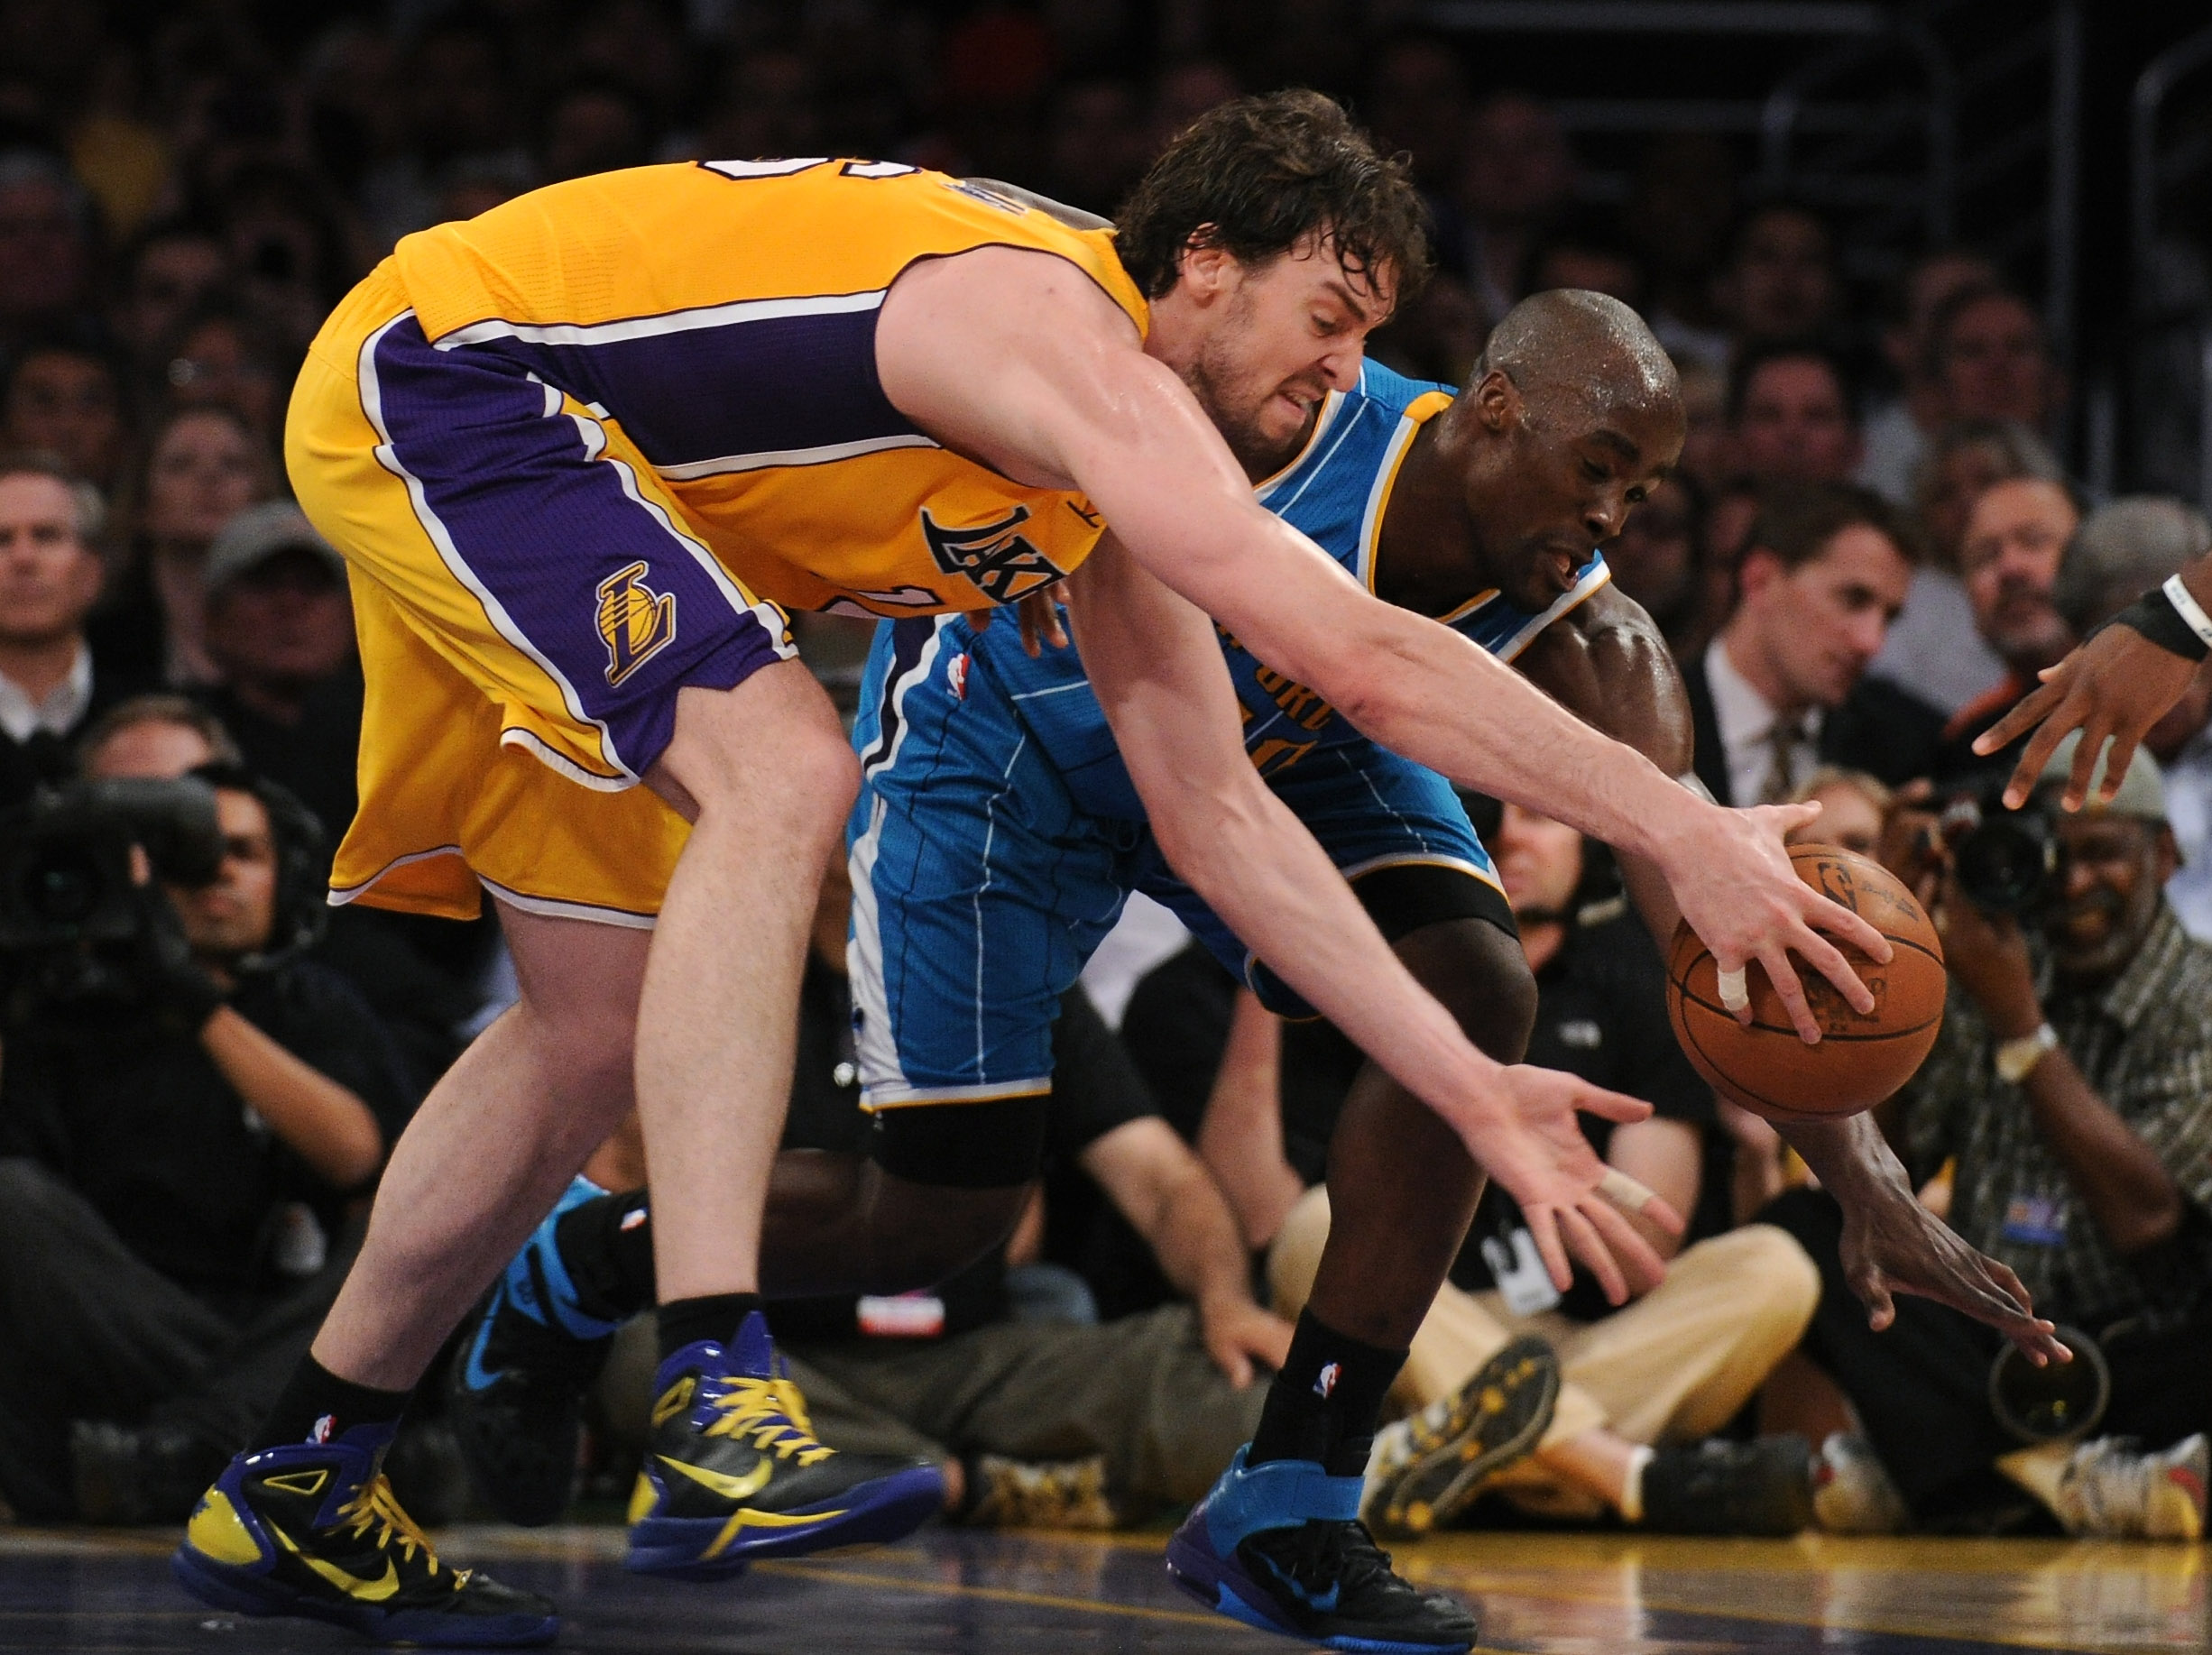 LOS ANGELES, CA - APRIL 26:  Pau Gasol #16 of the Los Angeles Lakers and Emeka Okafor #50 of the New Orleans Hornets battle for a loose ball in the third quarter in Game Five of the Western Conference Quarterfinals in the 2011 NBA Playoffs on April 26, 20